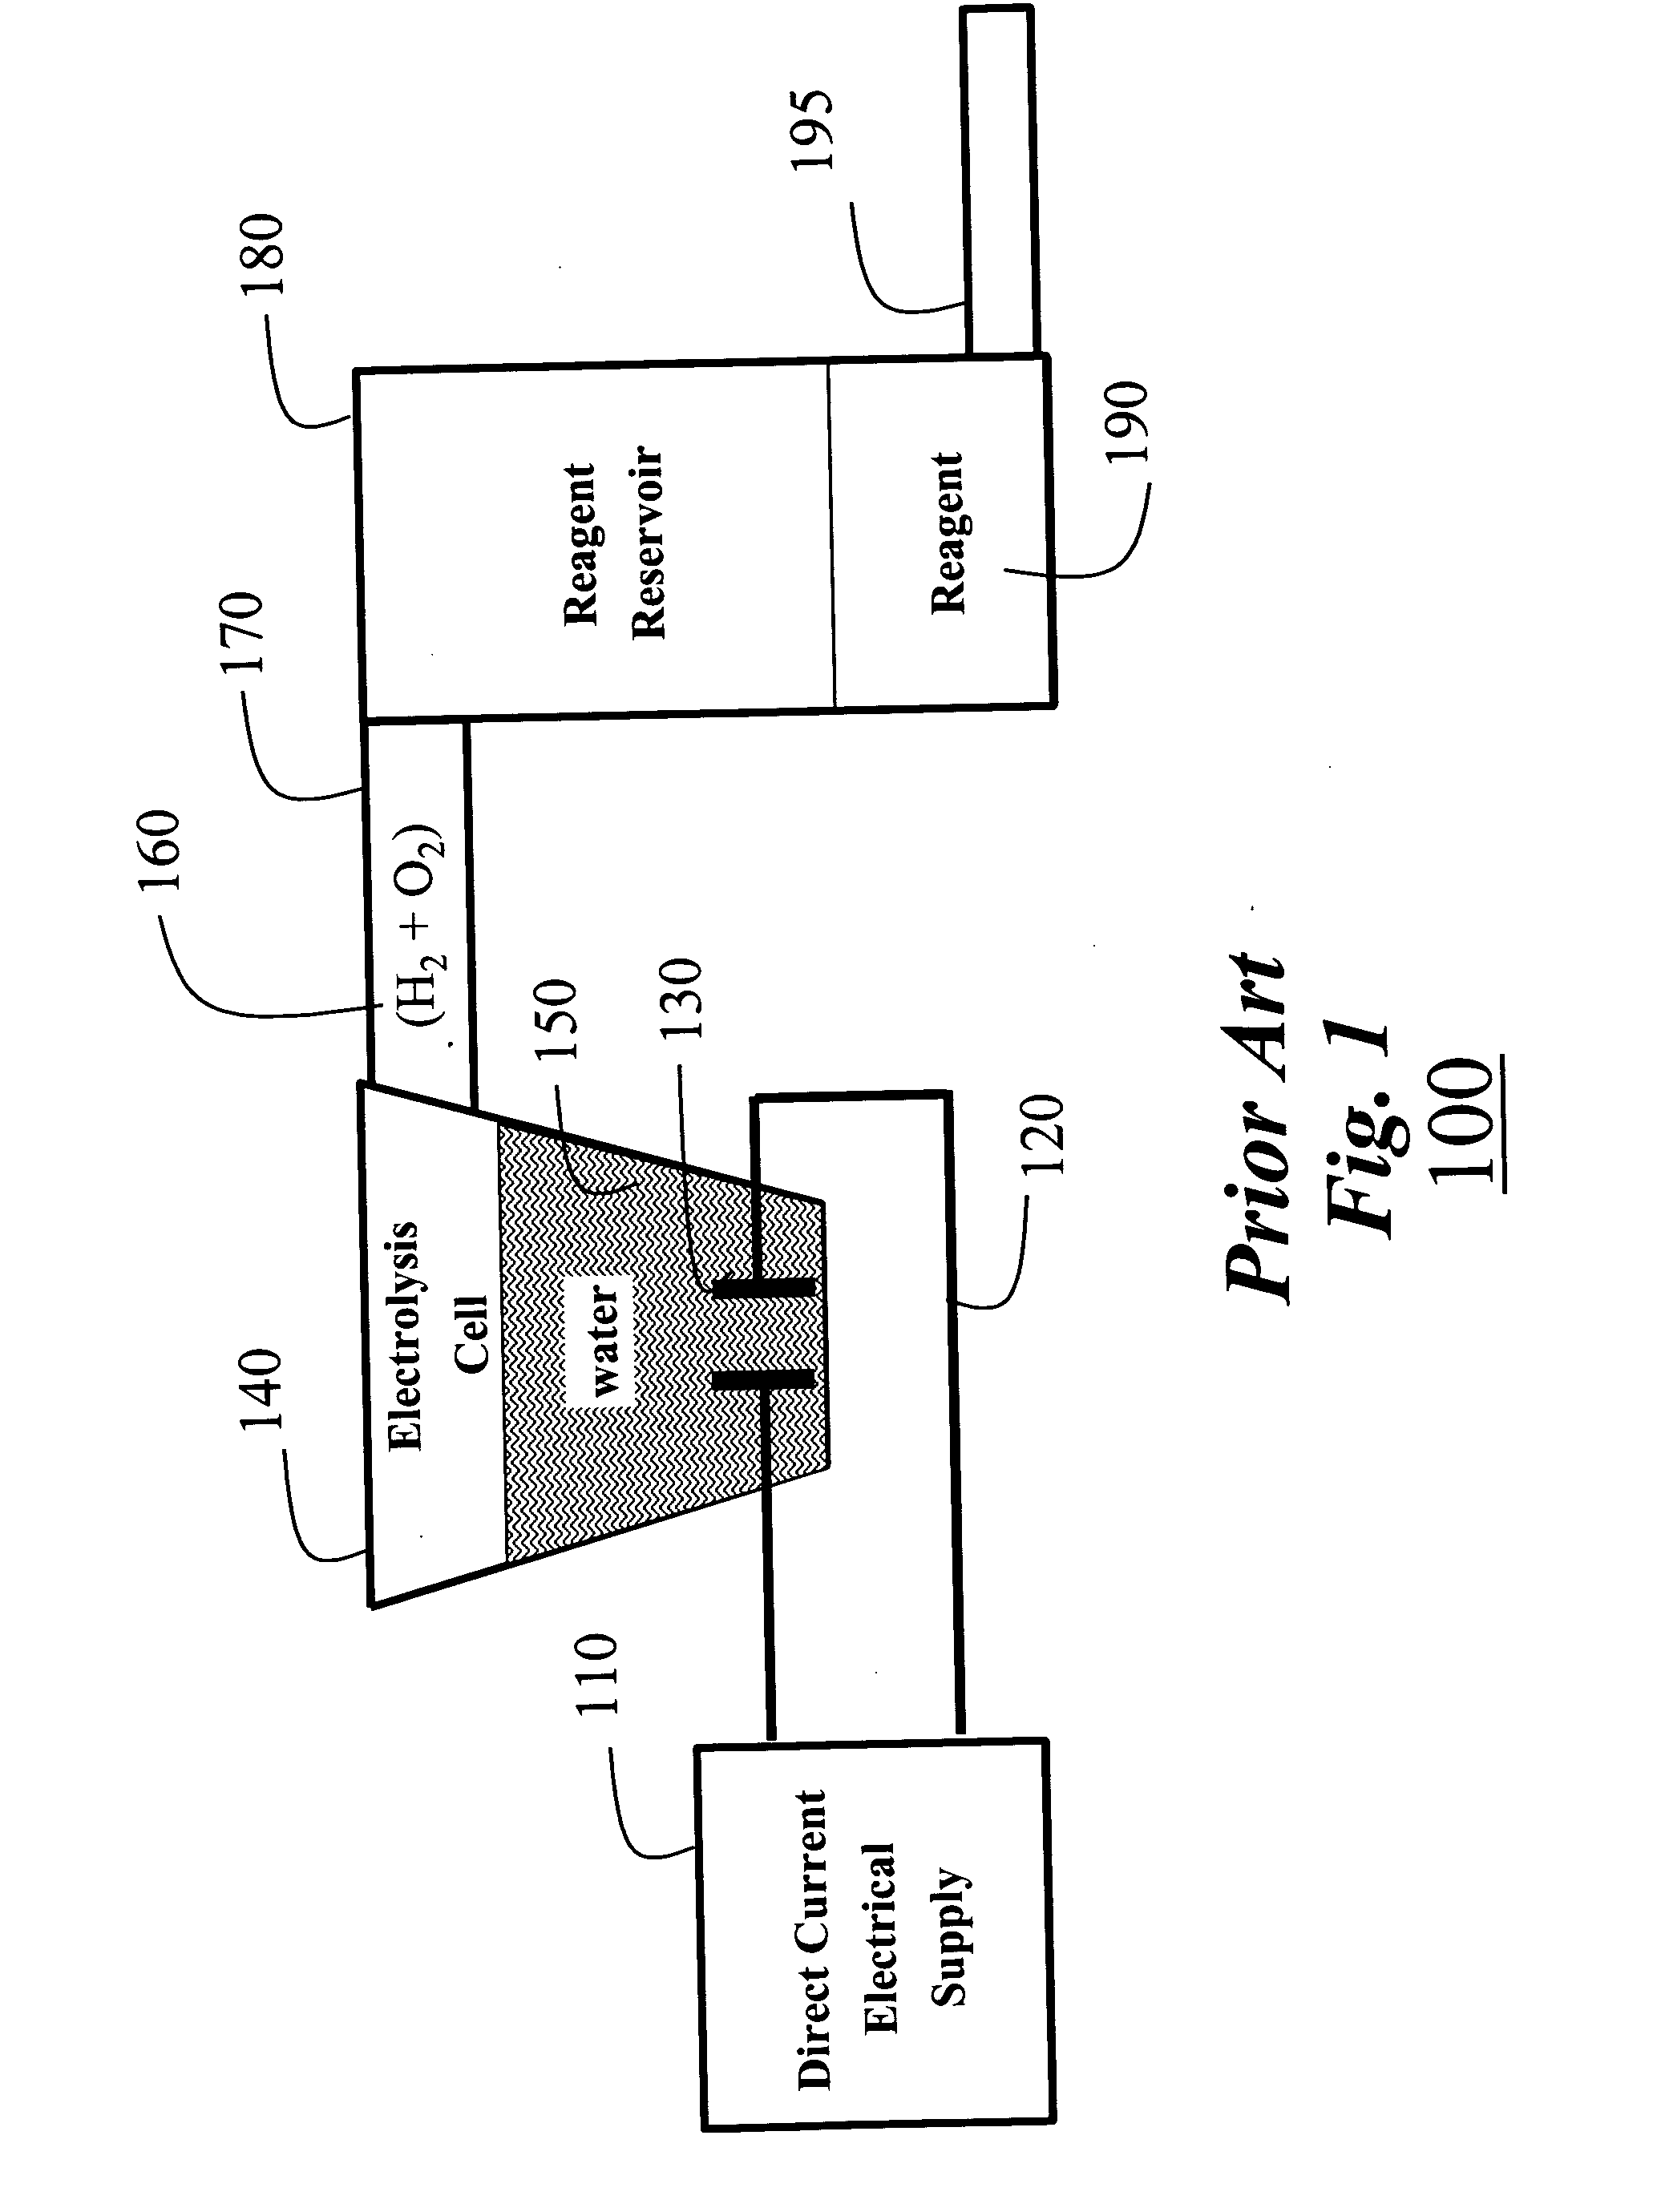 Fuel-cell actuated mechanical device